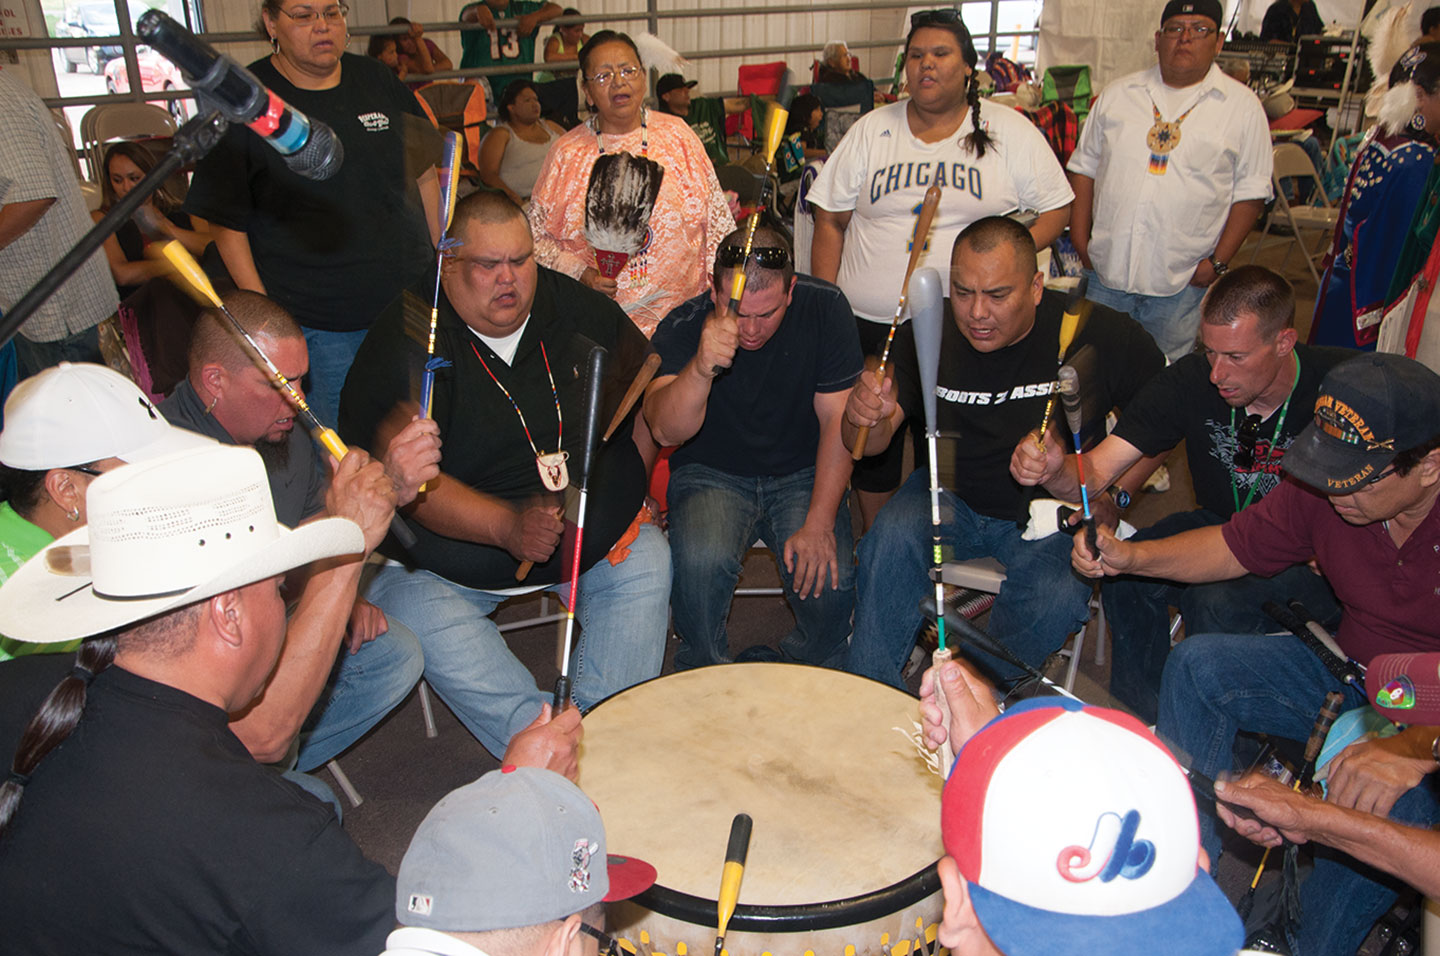 Host Southern Drum Yellow Jacket sings two round dance songs just after a grand entry.